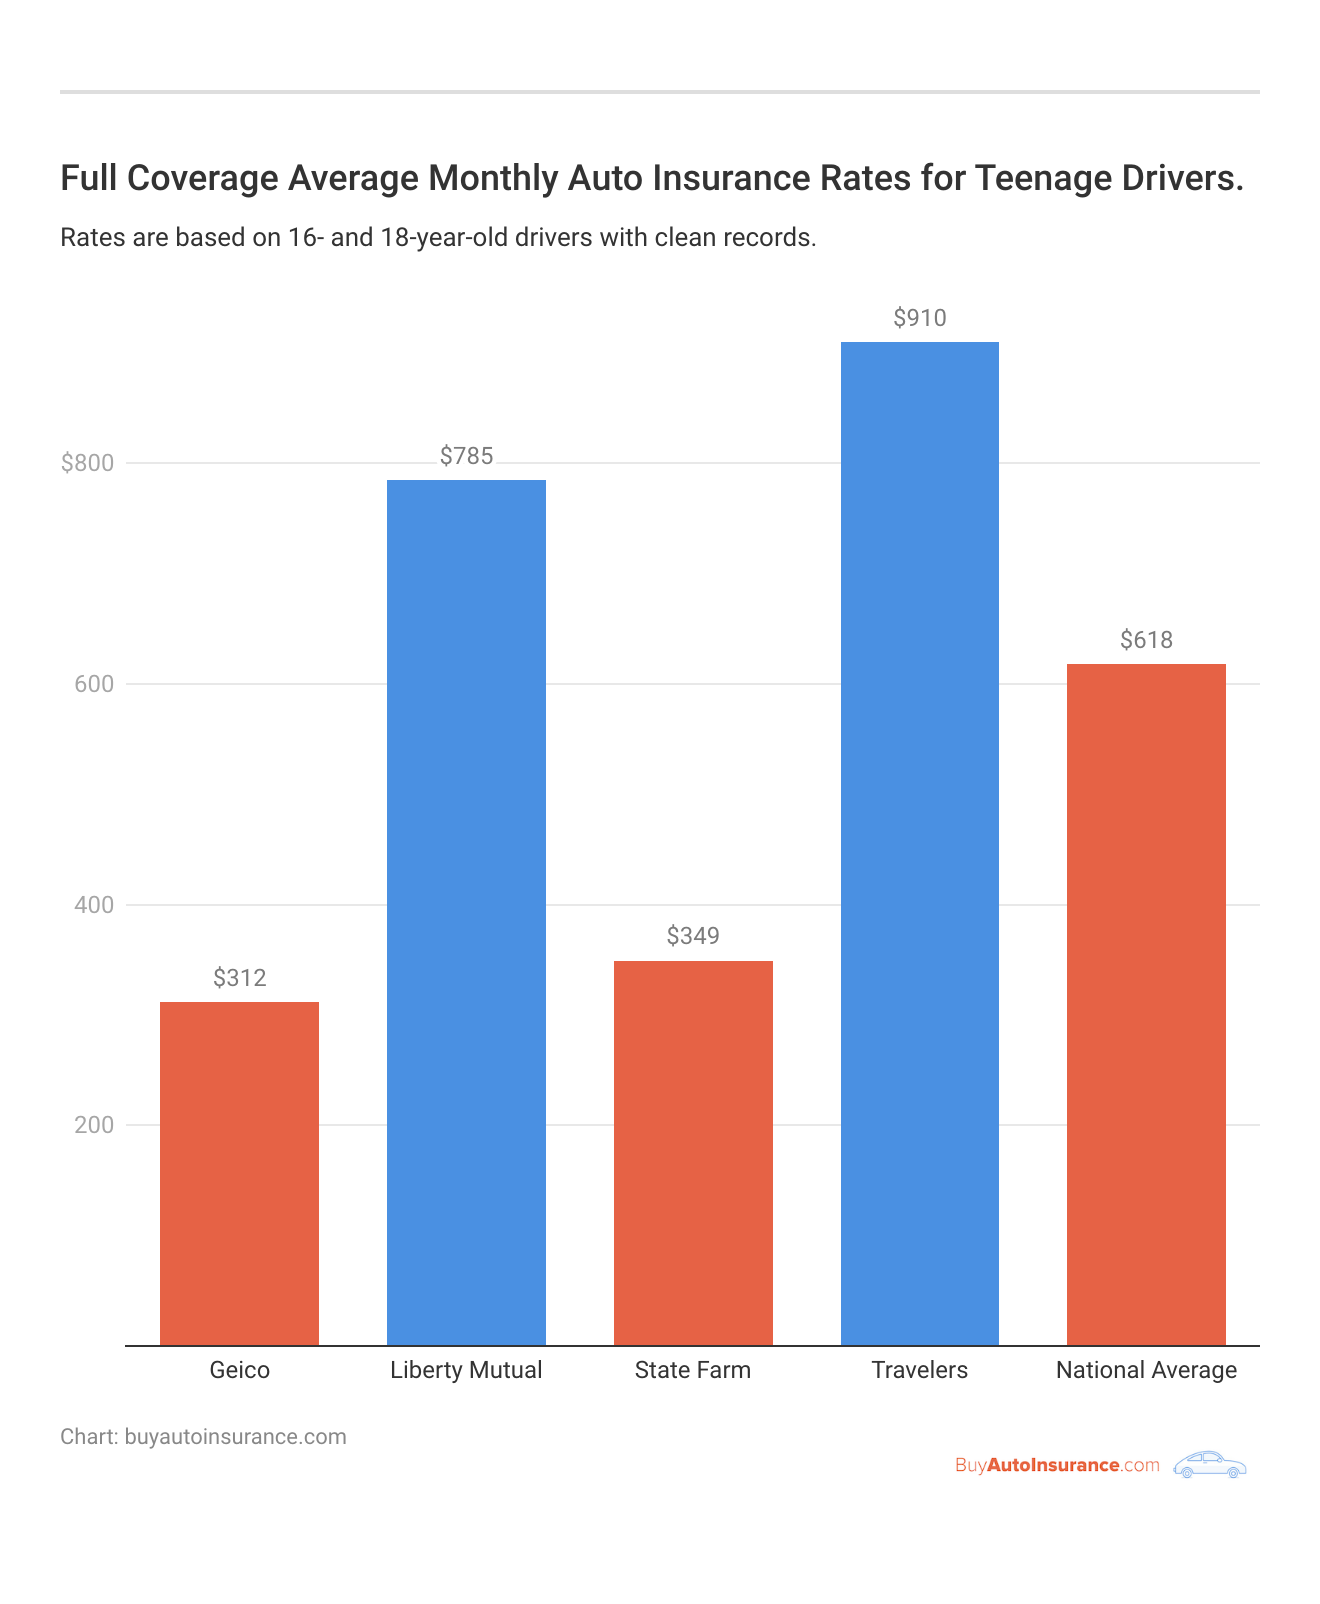 <h3>Full Coverage Average Monthly Auto Insurance Rates for Teenage Drivers.</h3>